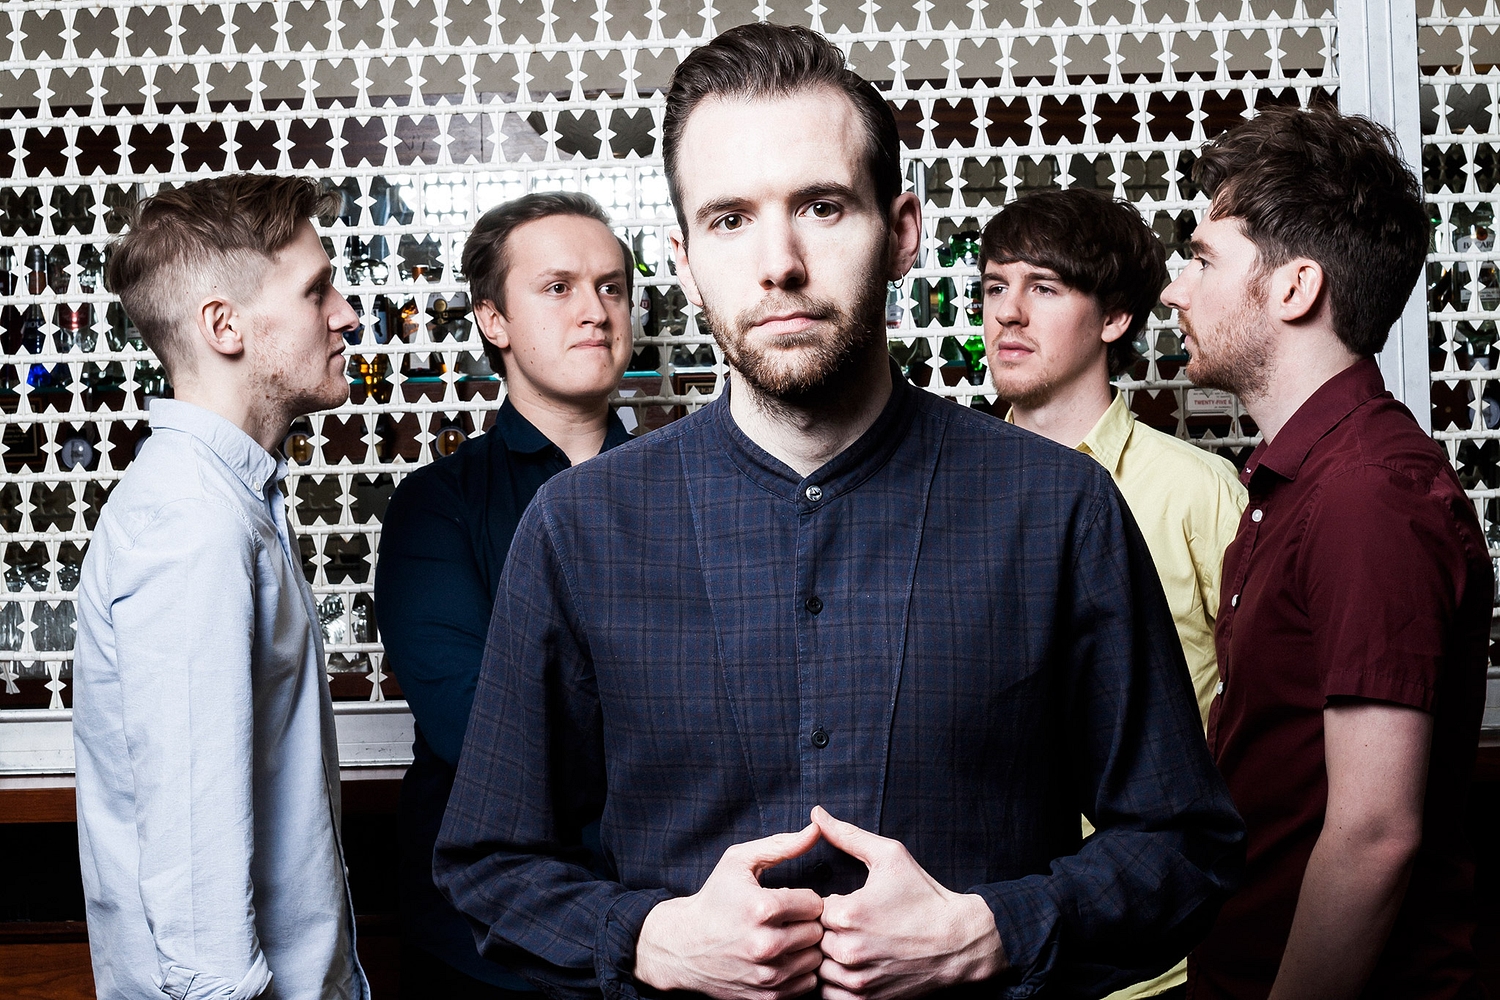 Dutch Uncles, Palace & more ready themselves for DIY’s Calling Out Stage at Kendal Calling